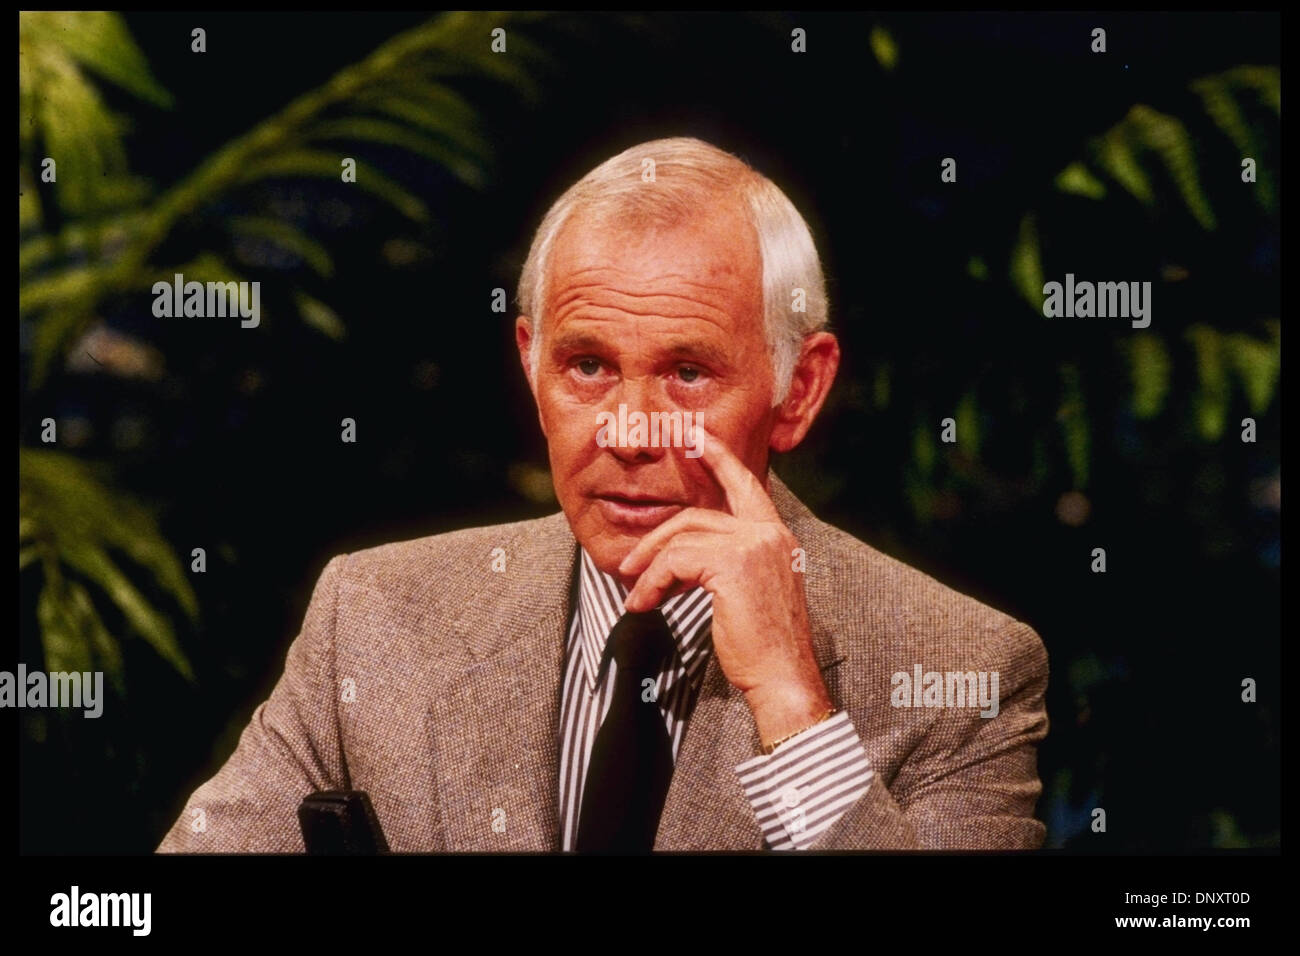 Johnny Carson, 30-year king of late night TV, dead at 79